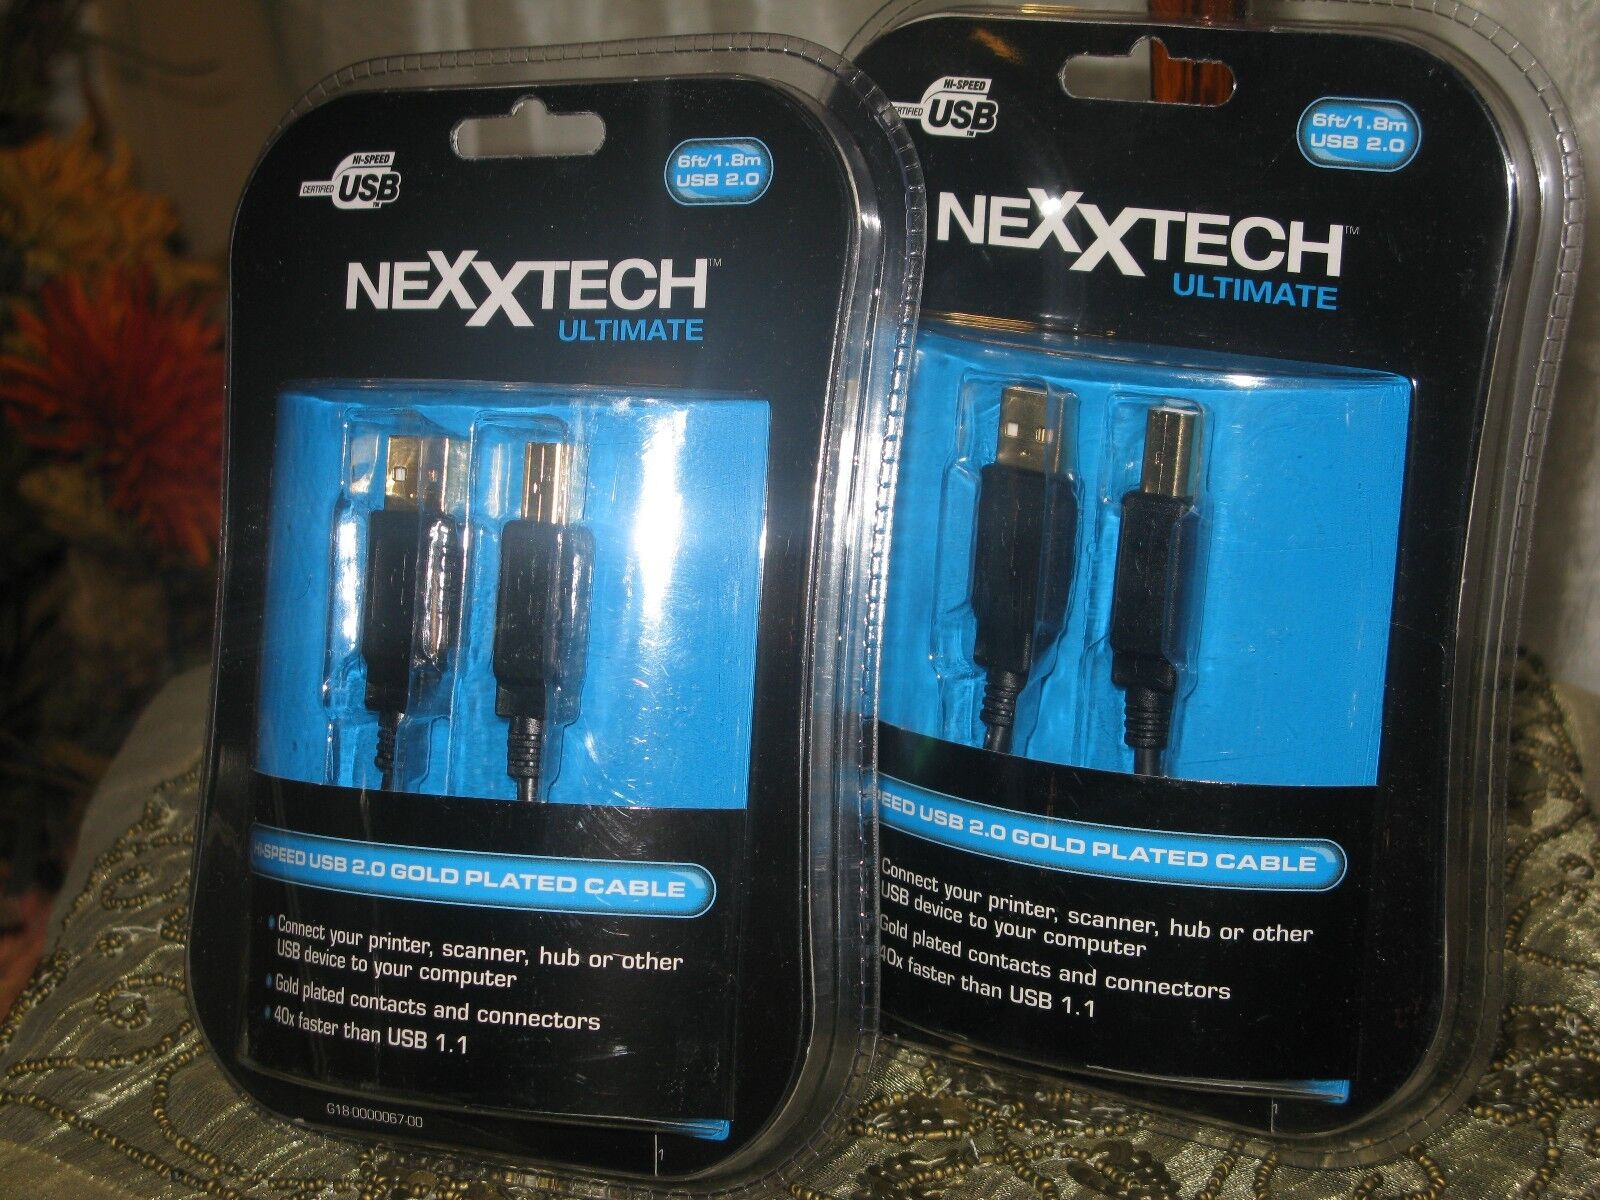 Nexxtech Ultimate Hi-Speed USB 2.0 Gold Plated 6 ft Cable. Lot of 2. New.